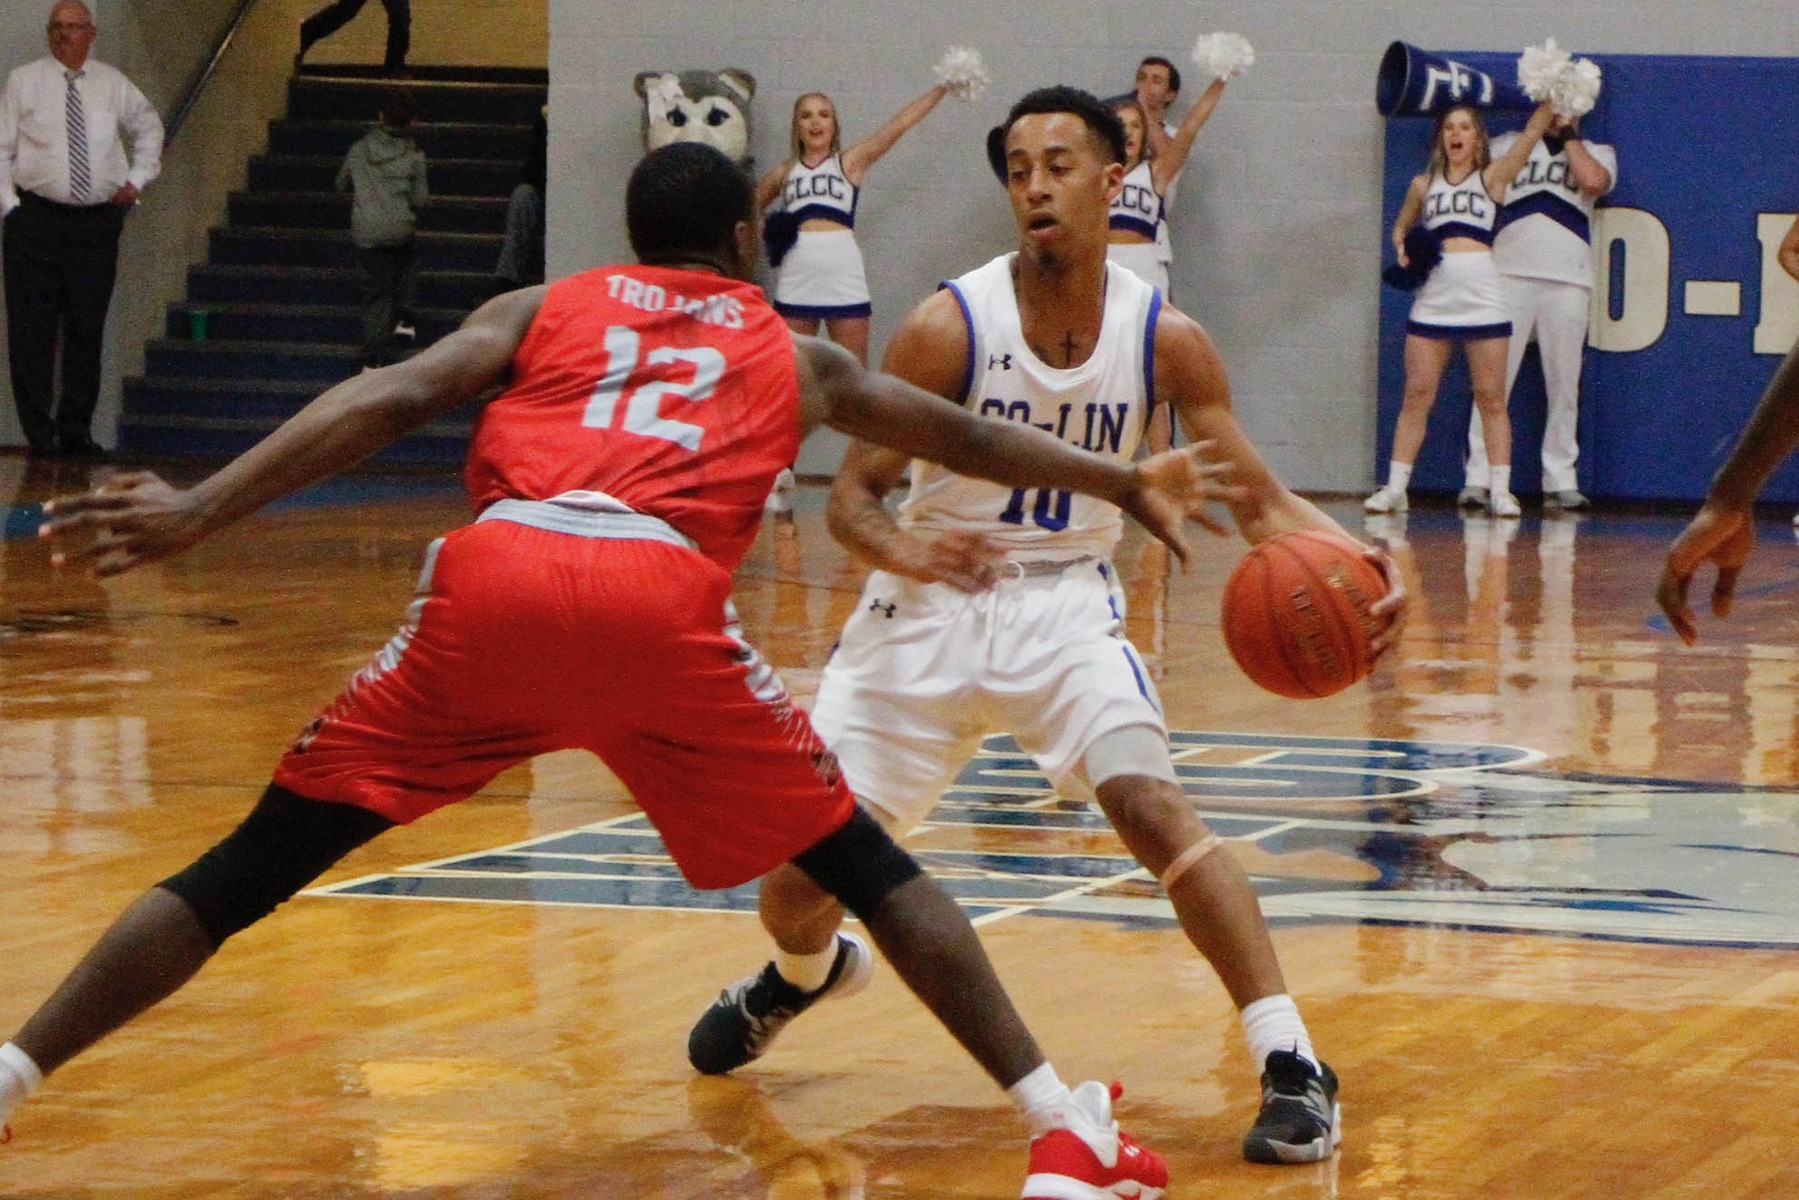 Whitworth scores 31, but Co-Lin falls to Delta, 70 to 66